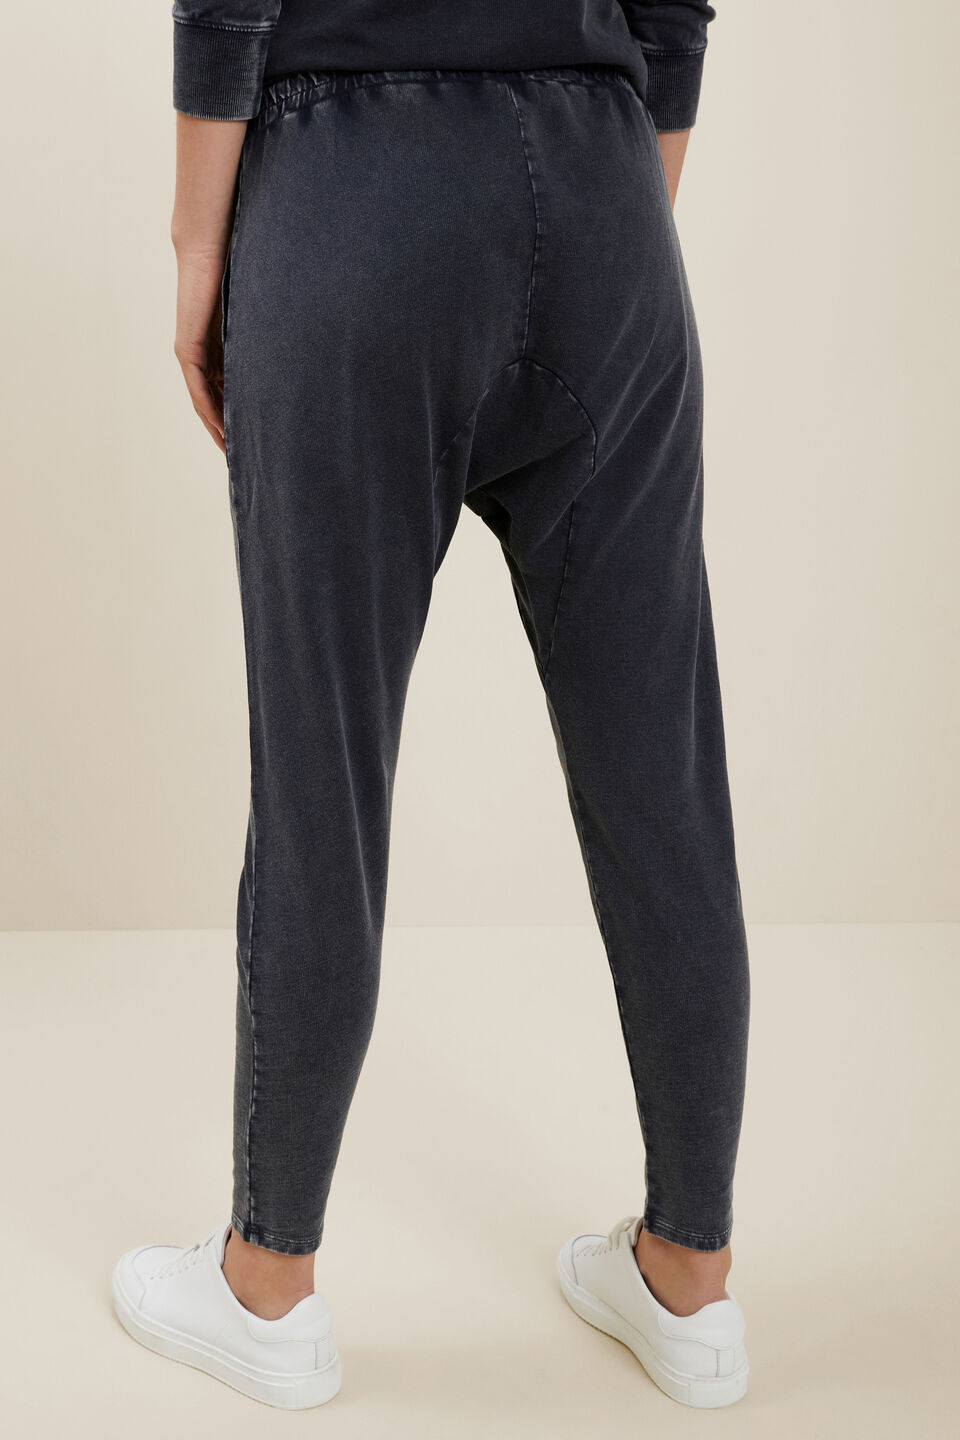 Washed Terry Trackpants  Deep Navy  hi-res